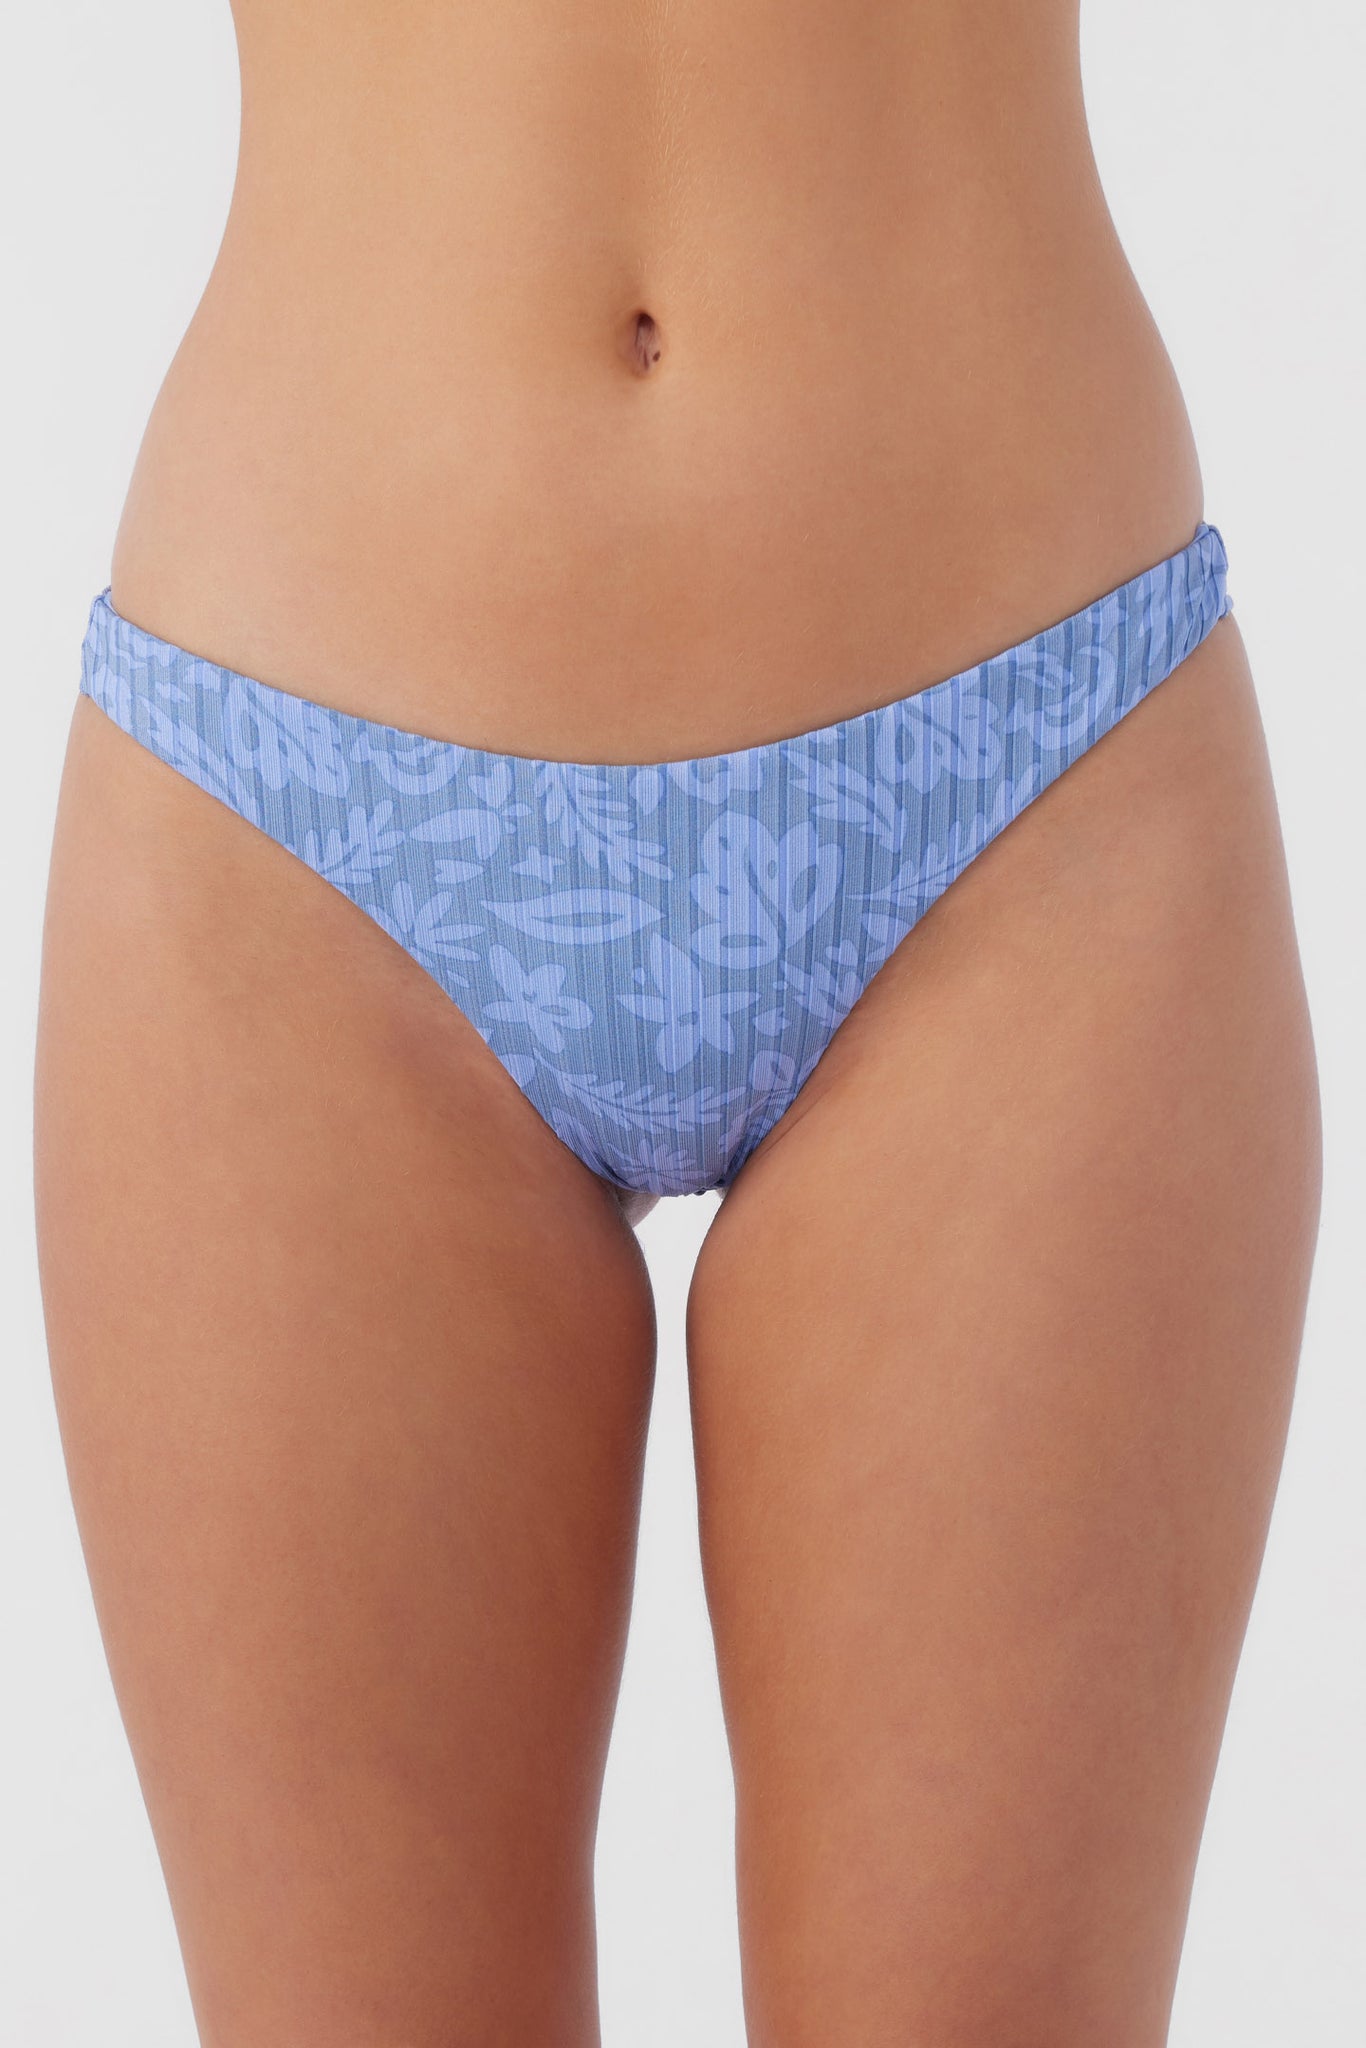 Bestswimwear Oyster Rib Barely There Bottom